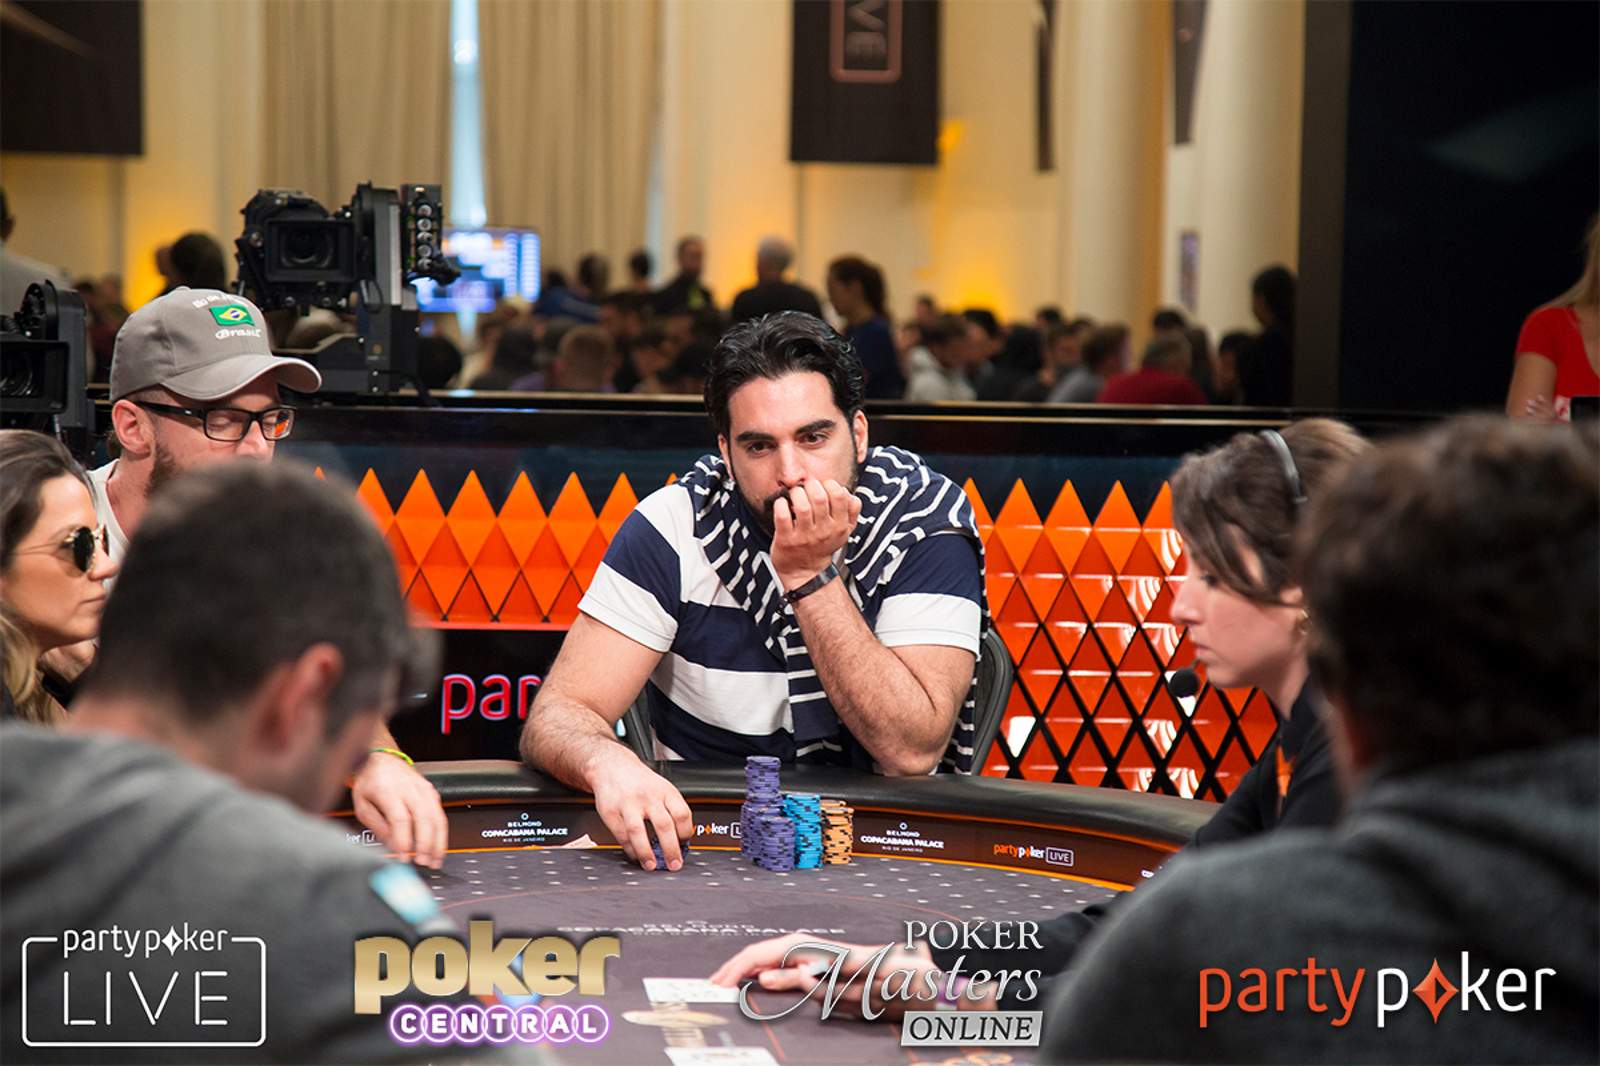 Wins for Pauli Ayras and Alexandros Kolonias in Poker Masters Online on partypoker